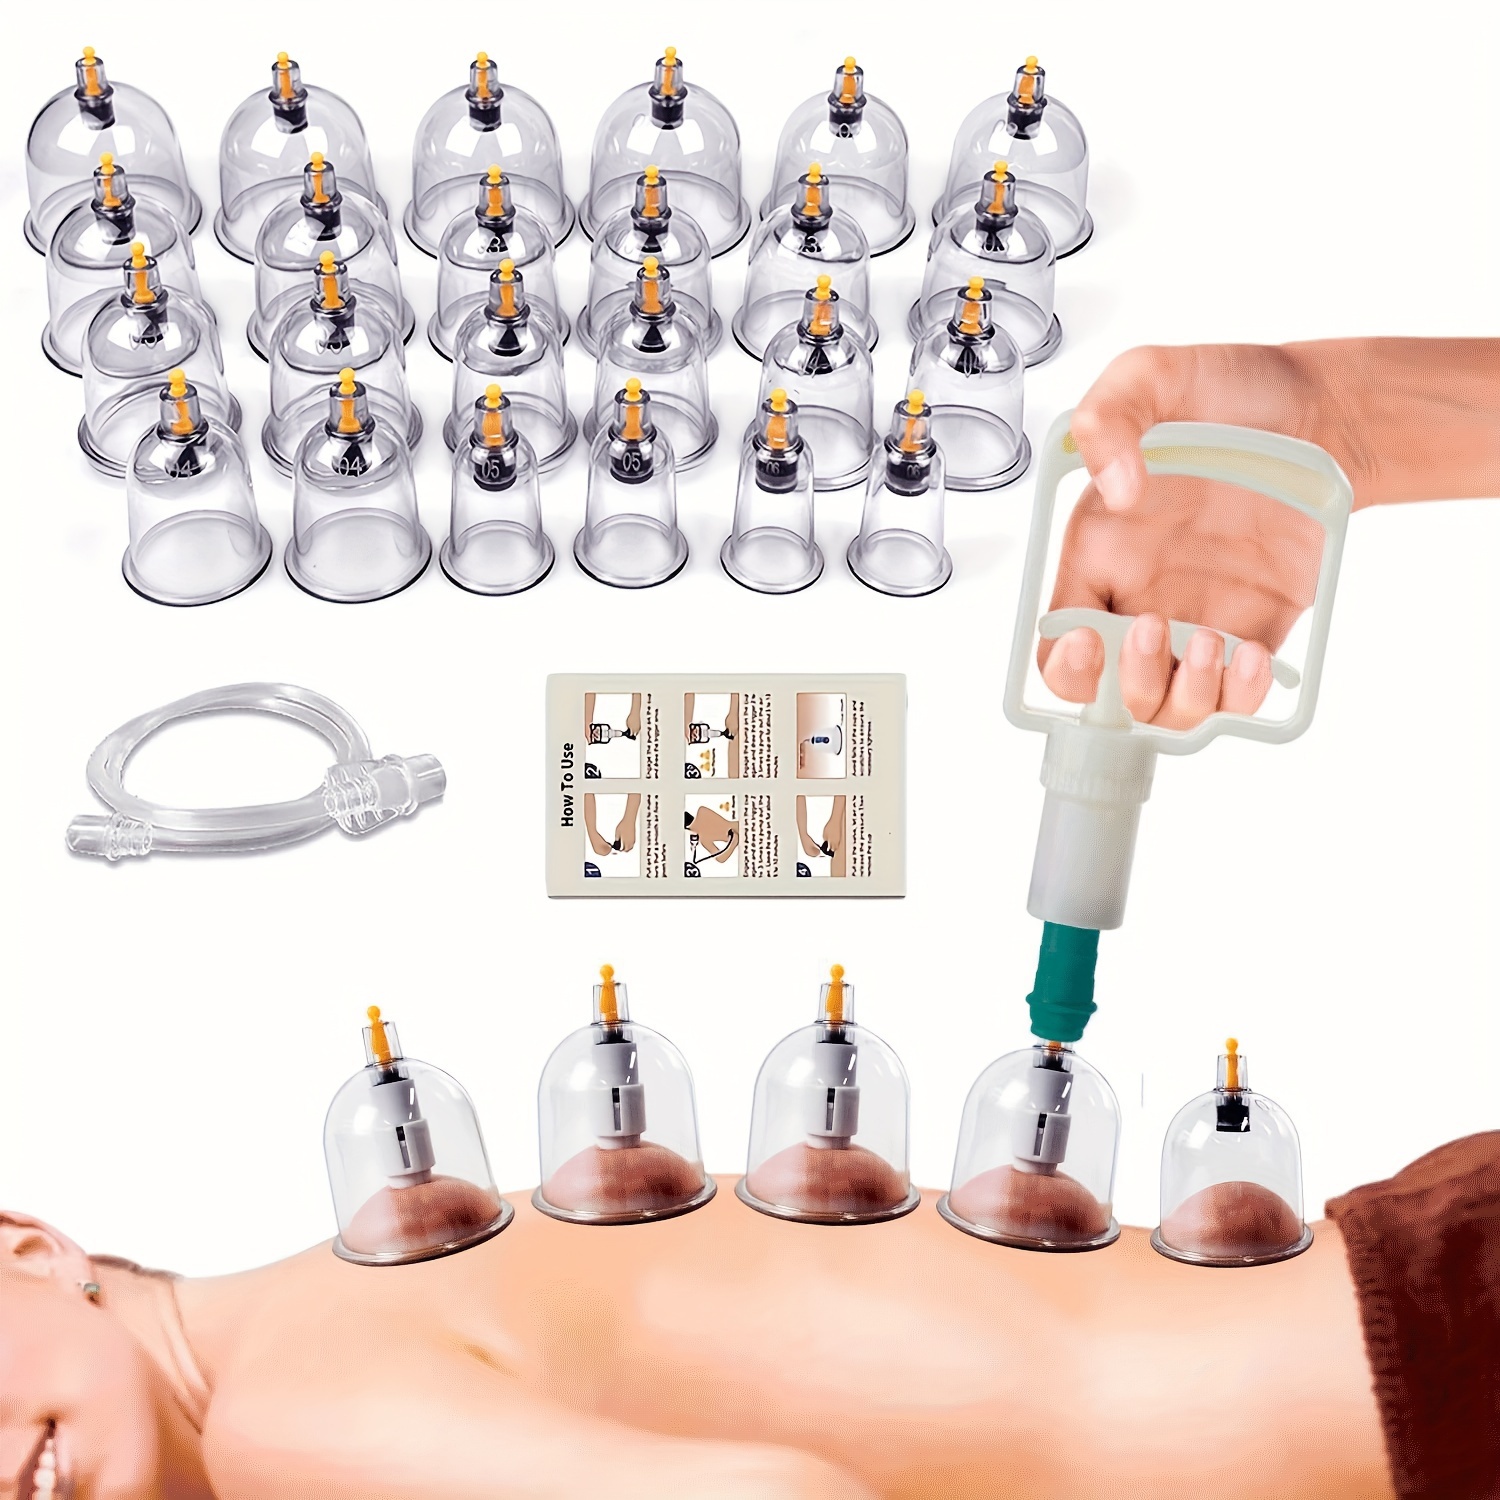  Facial Cupping Set - 4 Cups Glass Face Cupping Set, Cupping  Therapy Set in Exquisite Box with Instructions, Blue : Health & Household